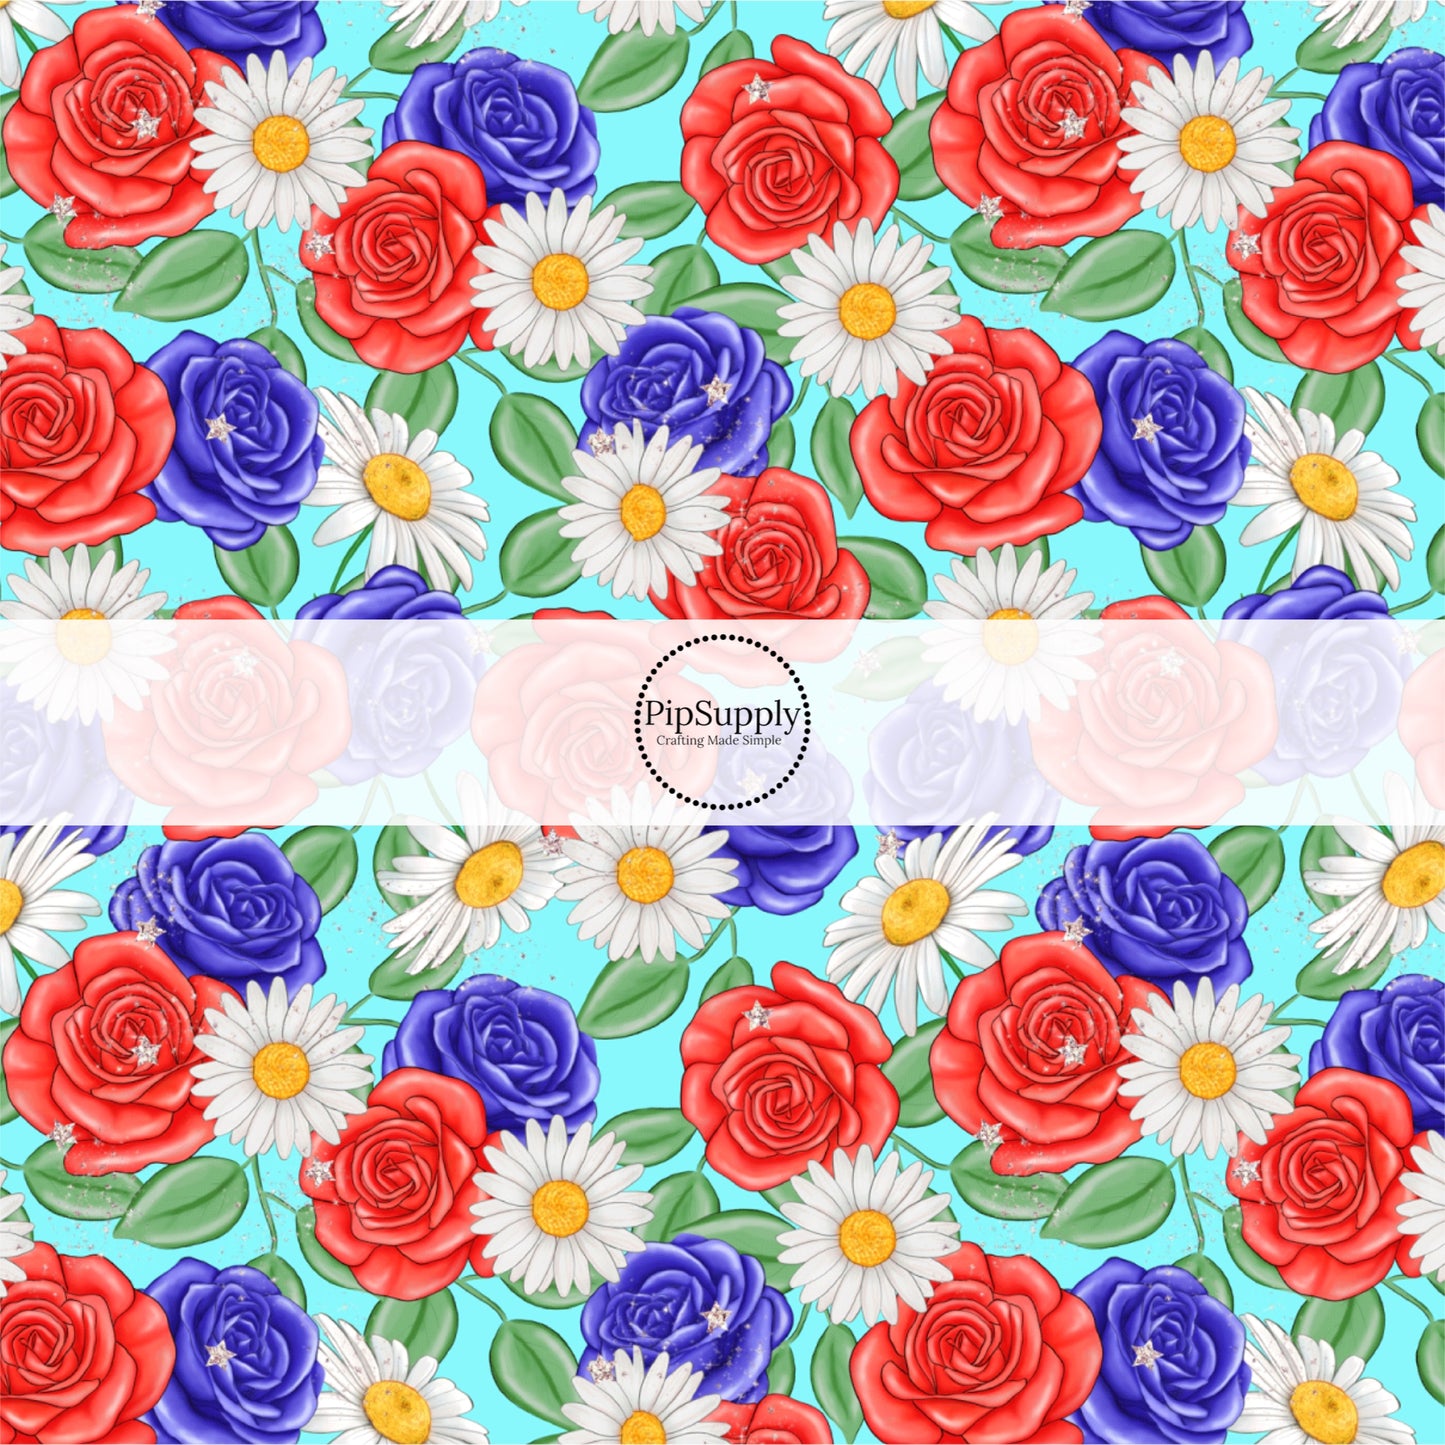 Red and blue roses and white daisies and stars on aqua blue bow strips